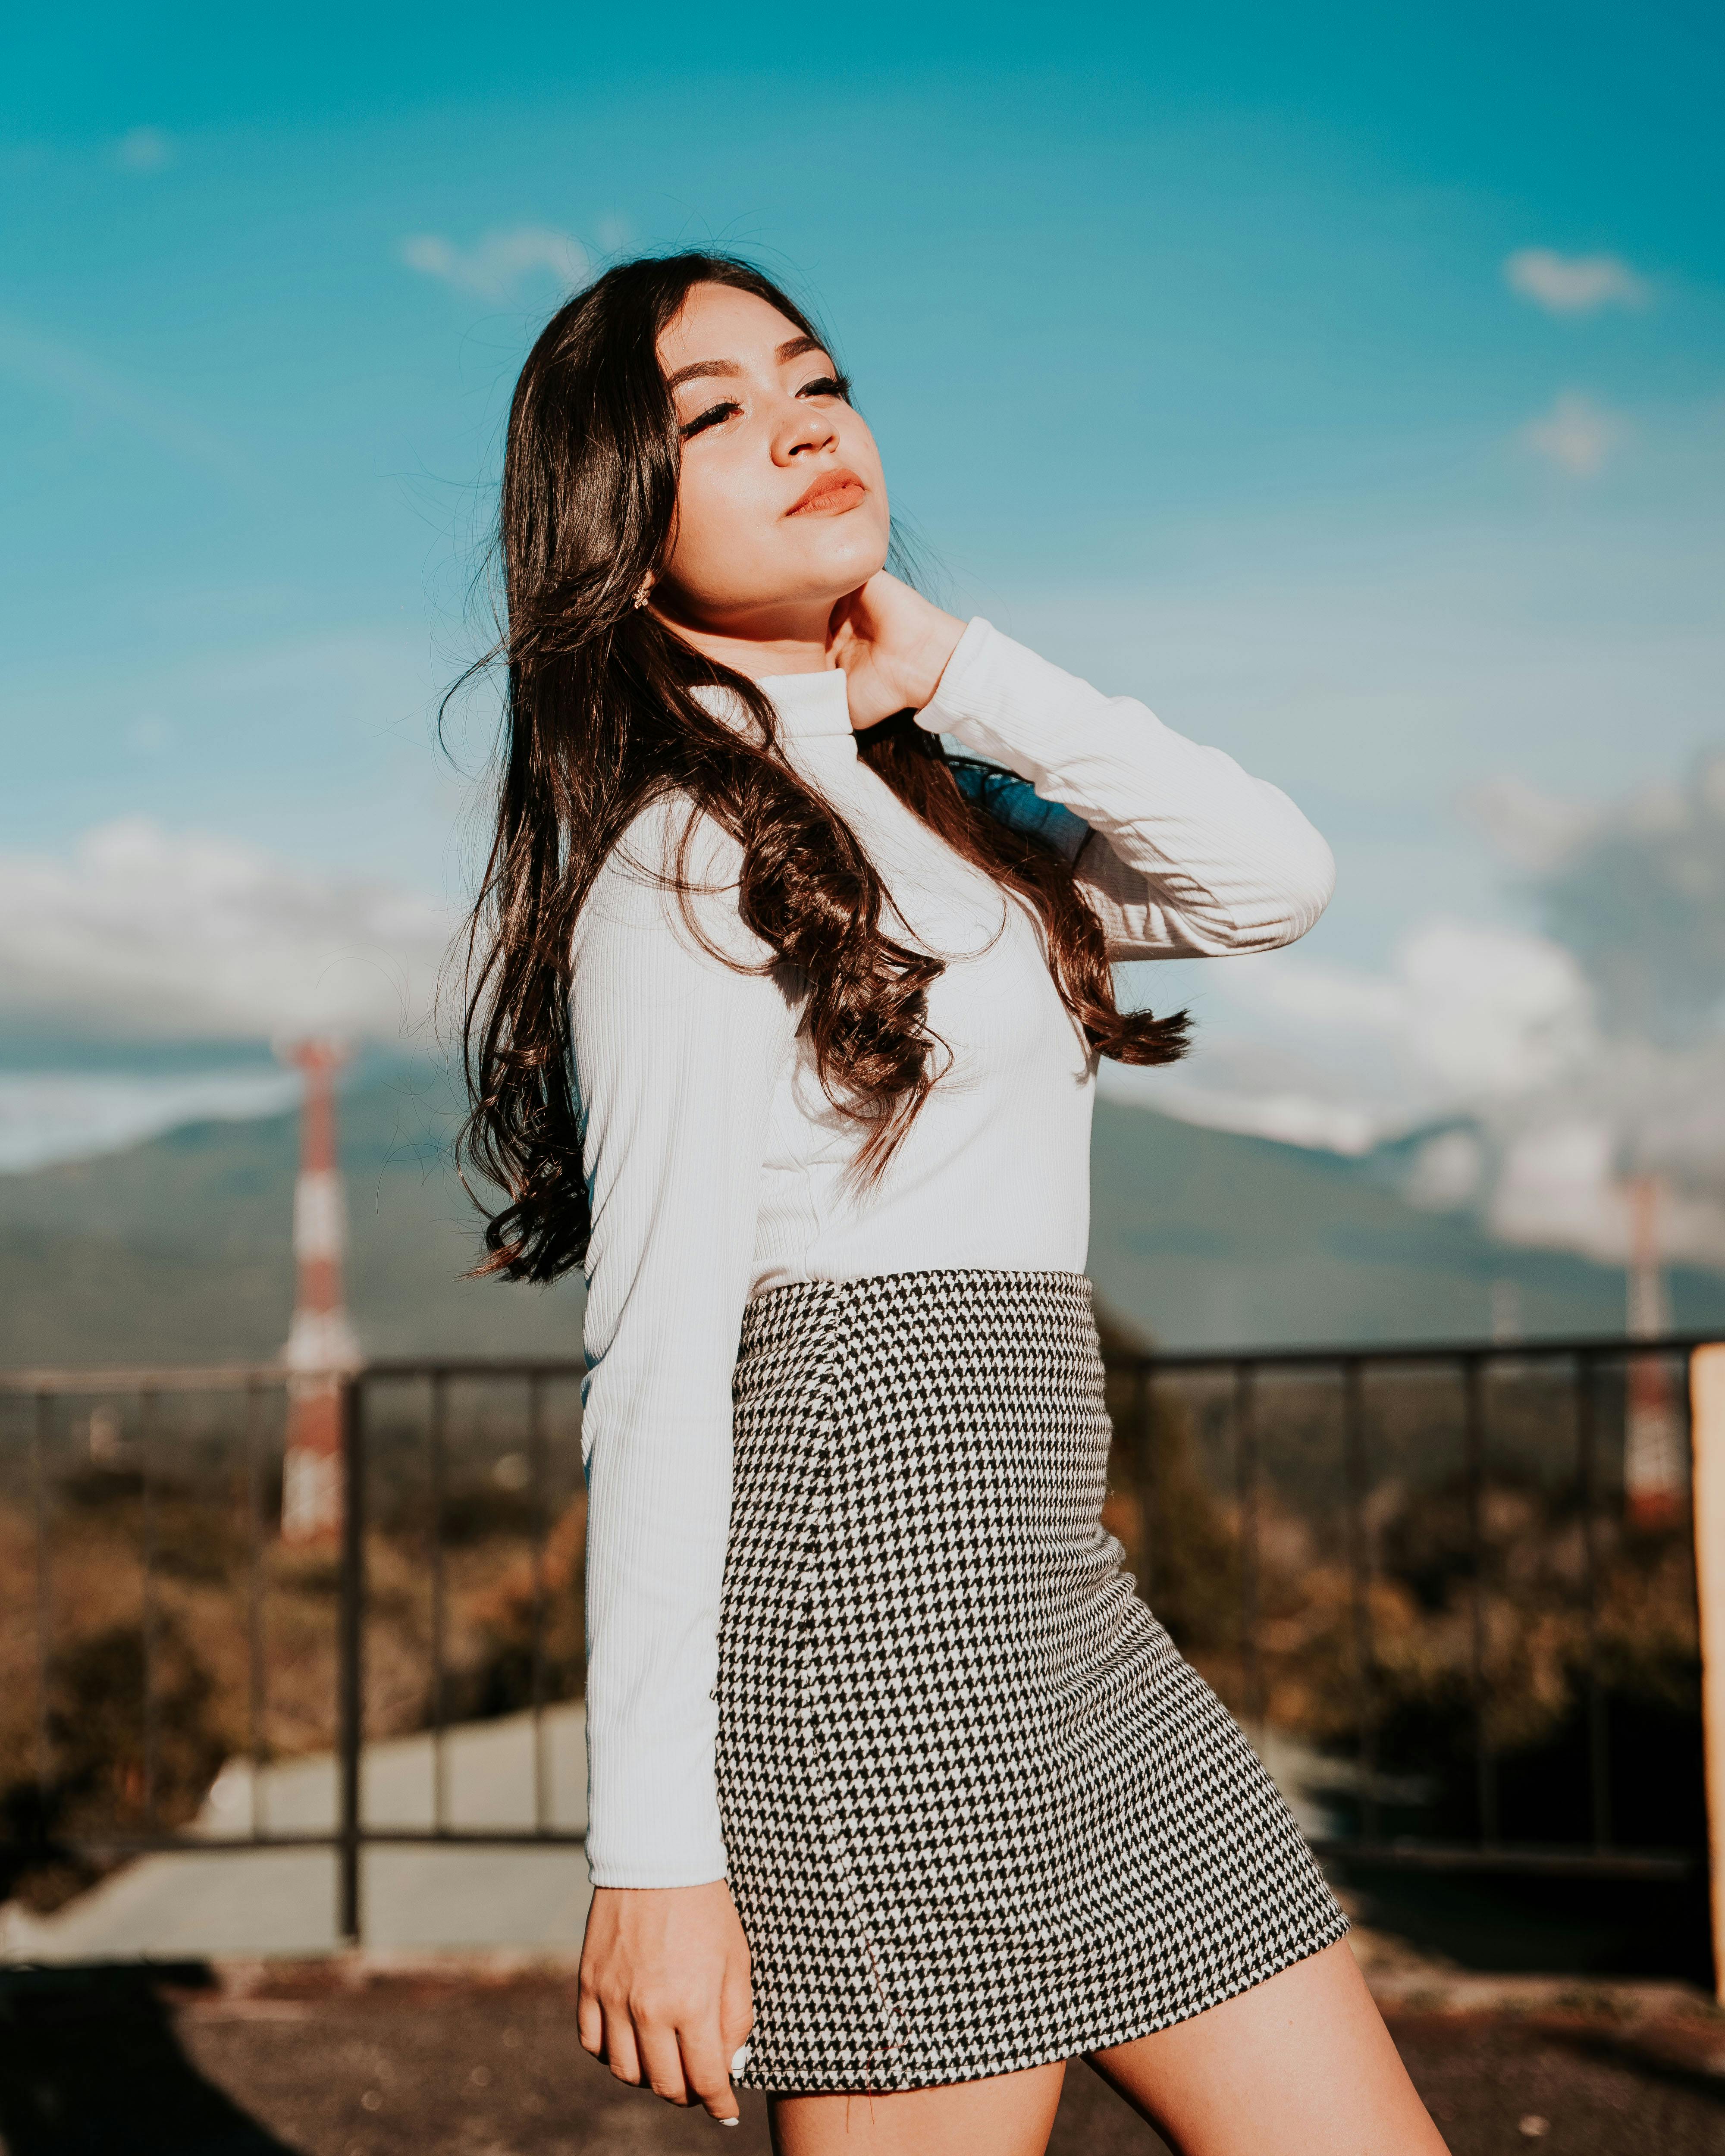 Sruti Nakul on Instagram: “Sorry for the spam but cannot keep calm with  these wonderful snaps and beautiful skirt… | Girl photo poses, Beautiful  skirts, Photo poses